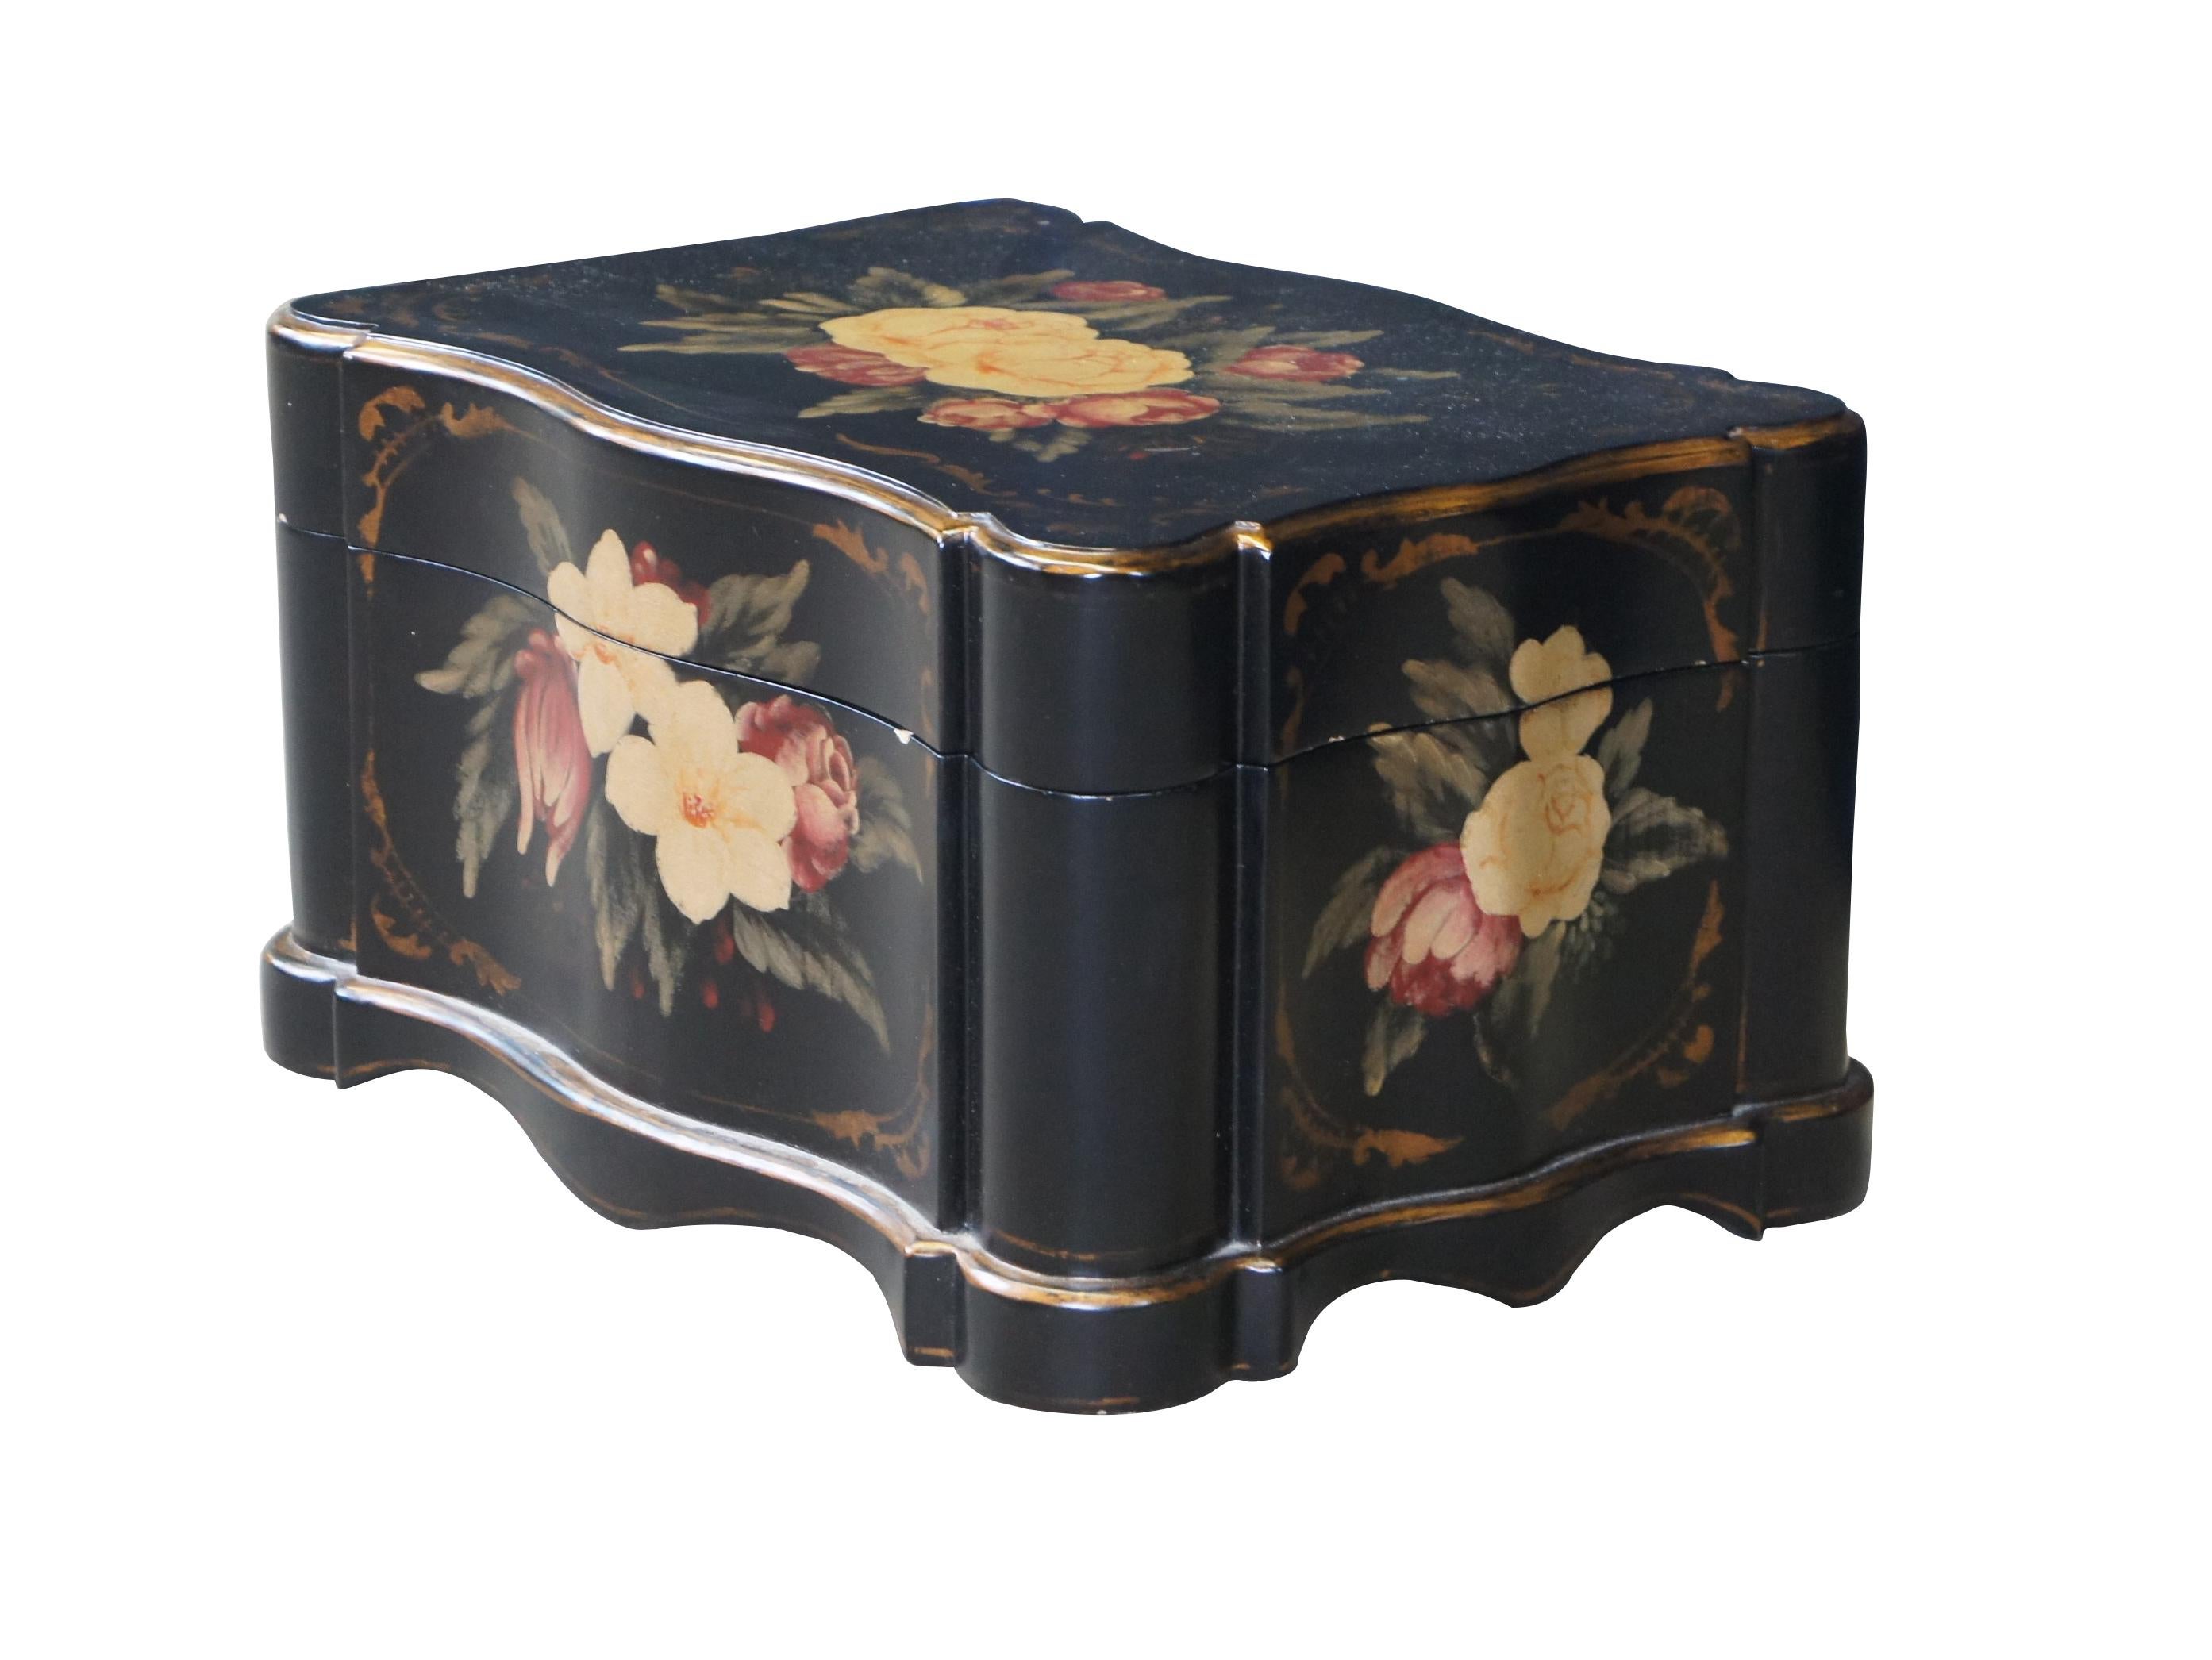 Jeanne Reeds Decorative floral box.  Hand painted with scalloped finish.

Dimensions:
14.5